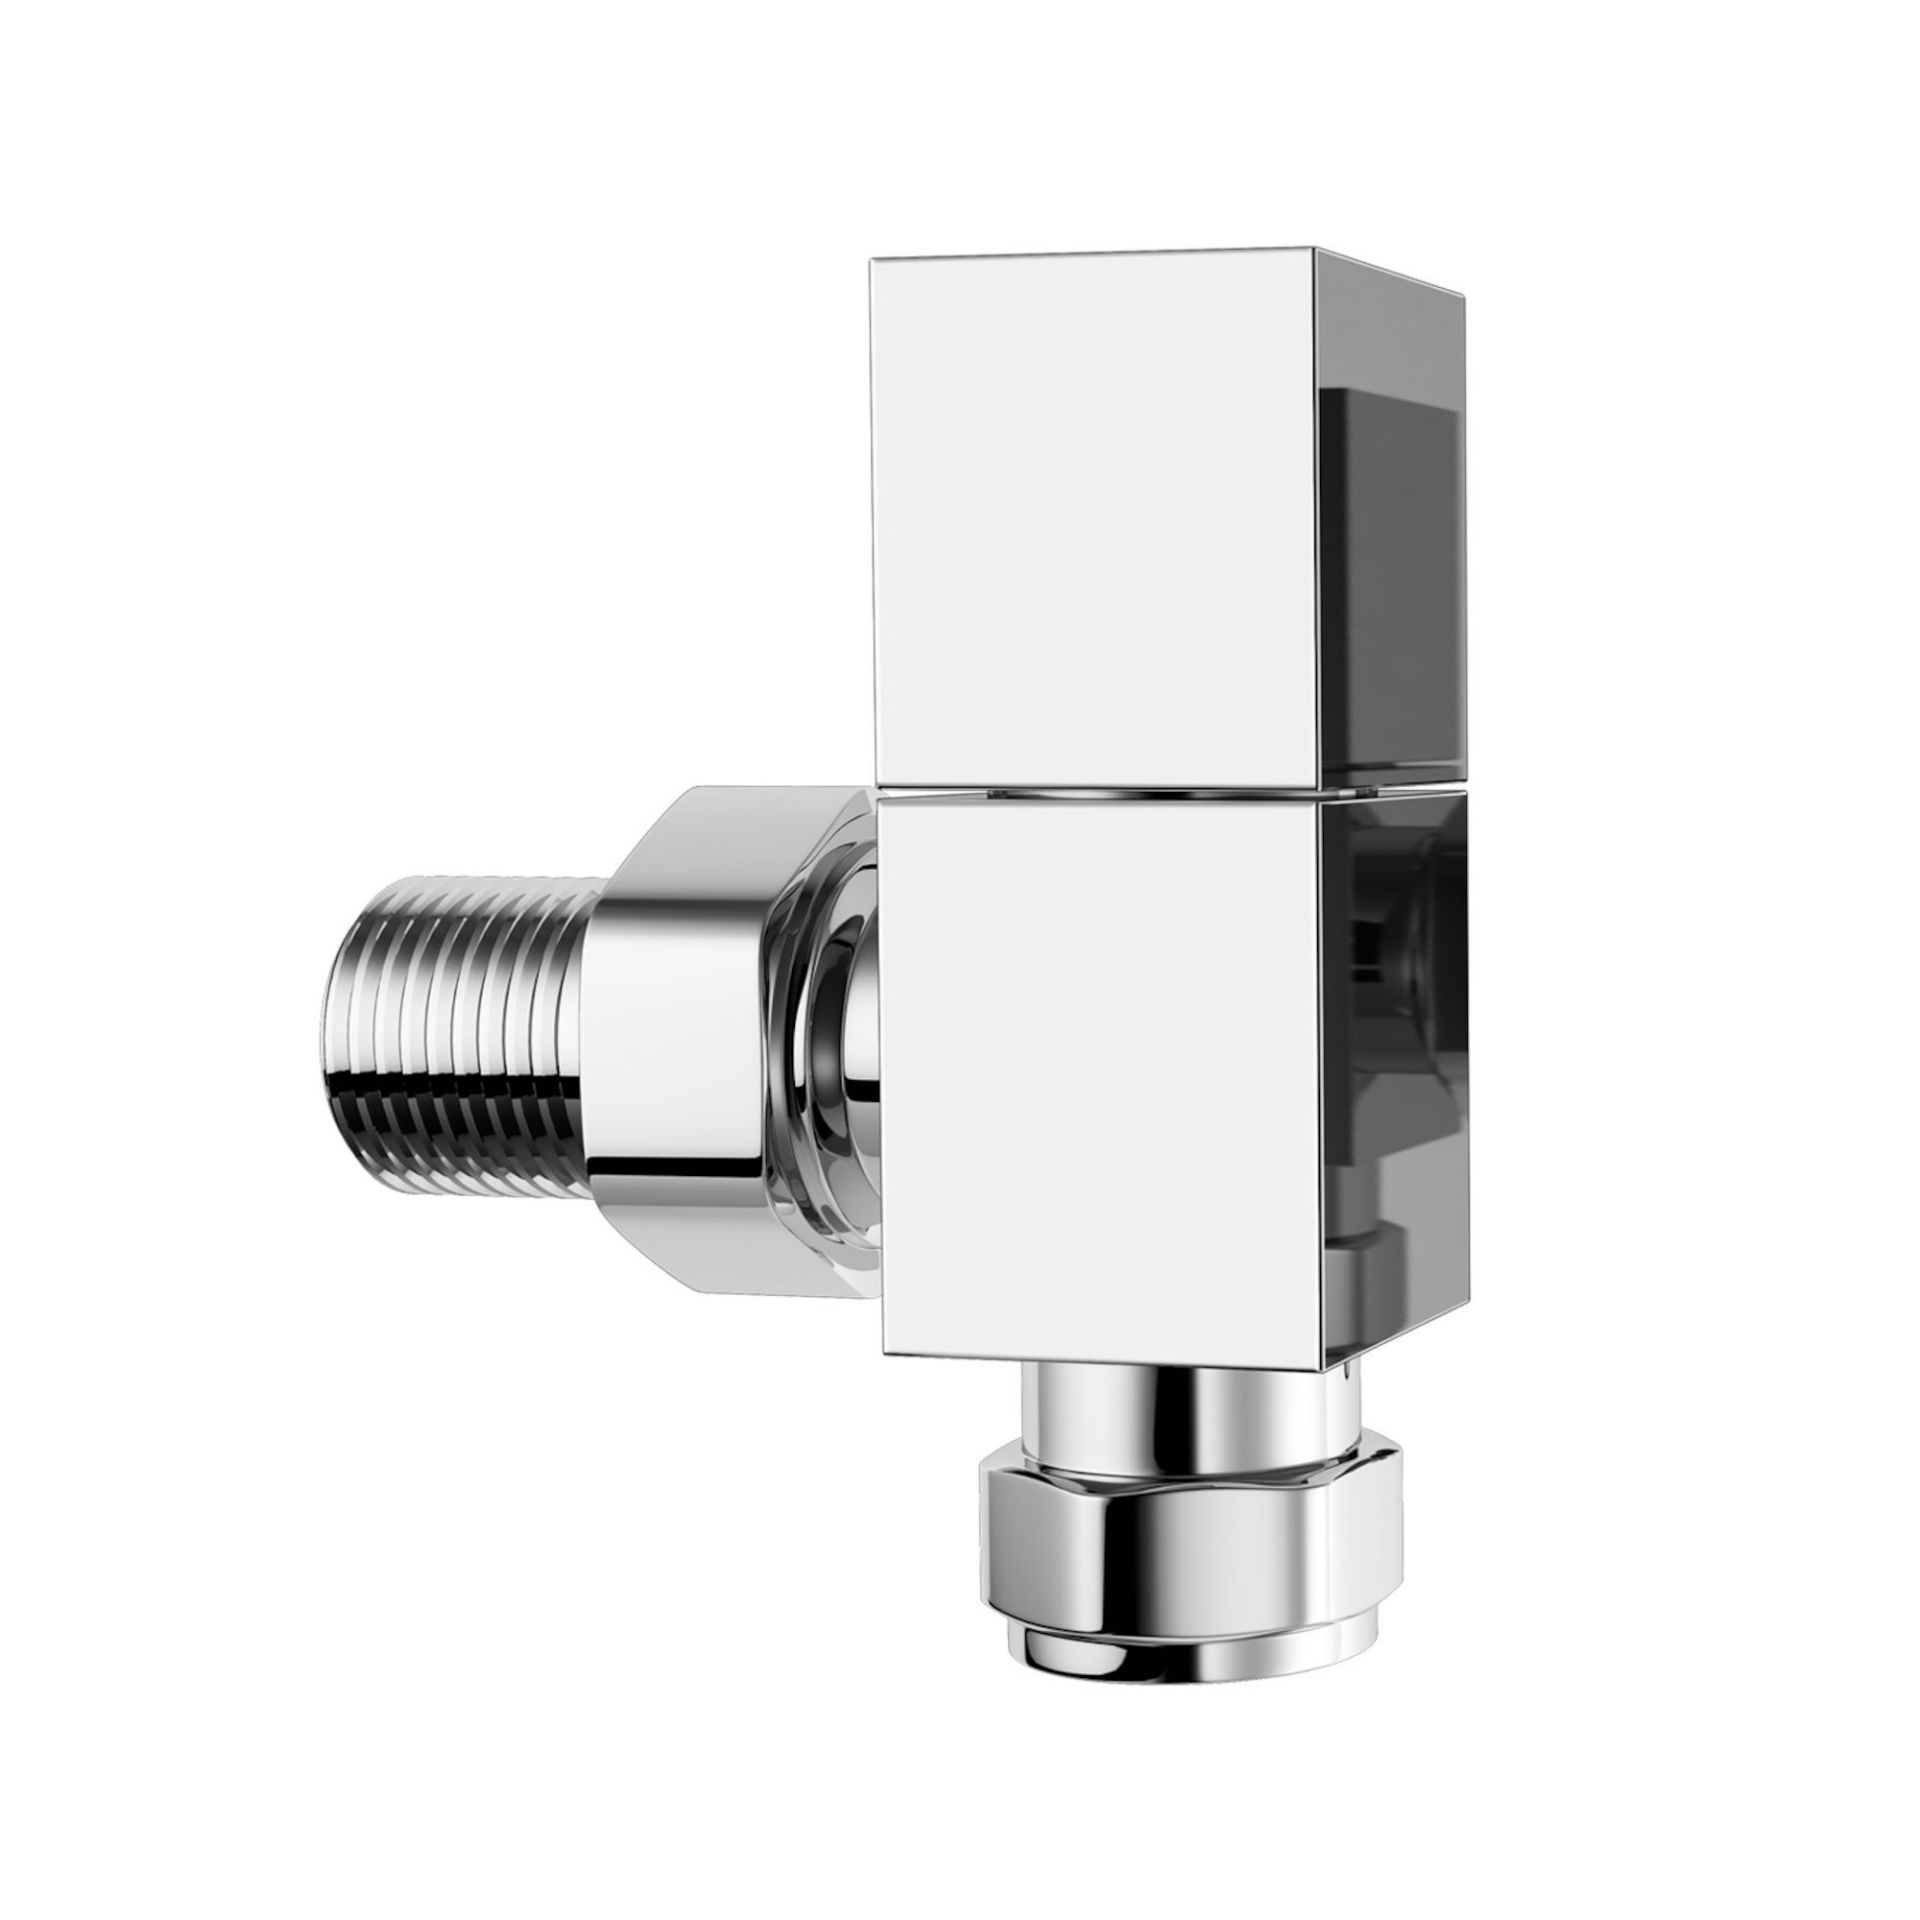 (MP66) 15mm Standard Connection Square Angled Chrome Radiator Valves These valves are designed to - Image 2 of 3